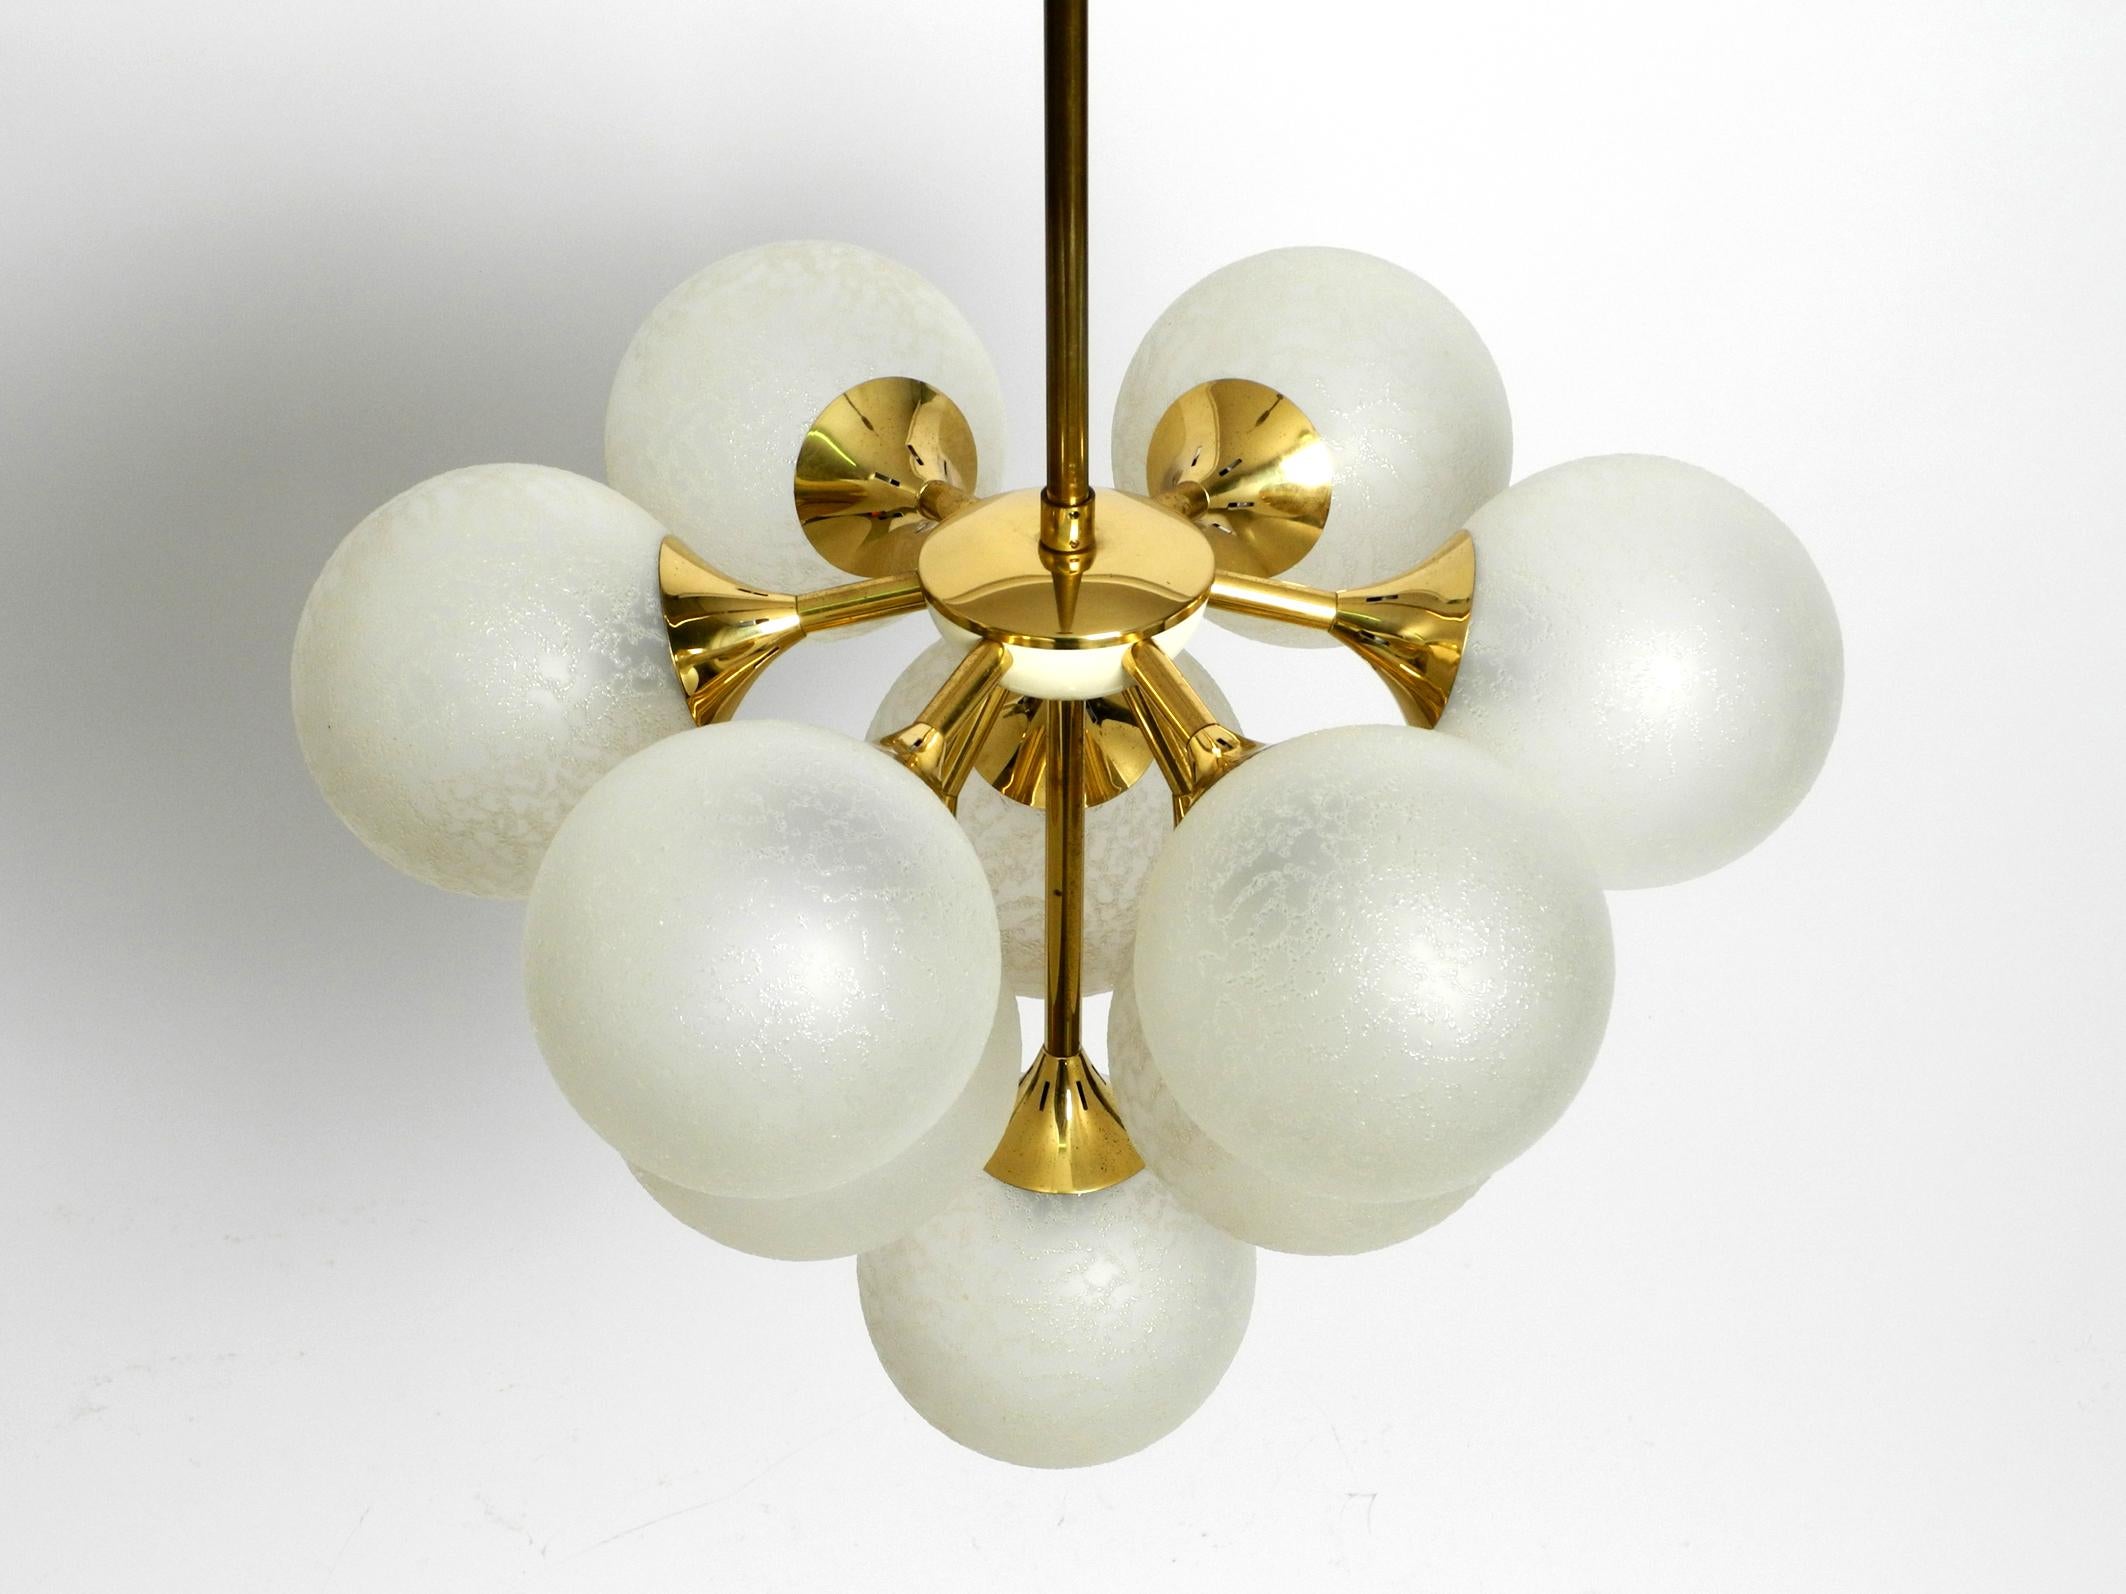 Space Age Beautiful rare 1960s Kaiser ceiling lamp with 10 spherical glass shades